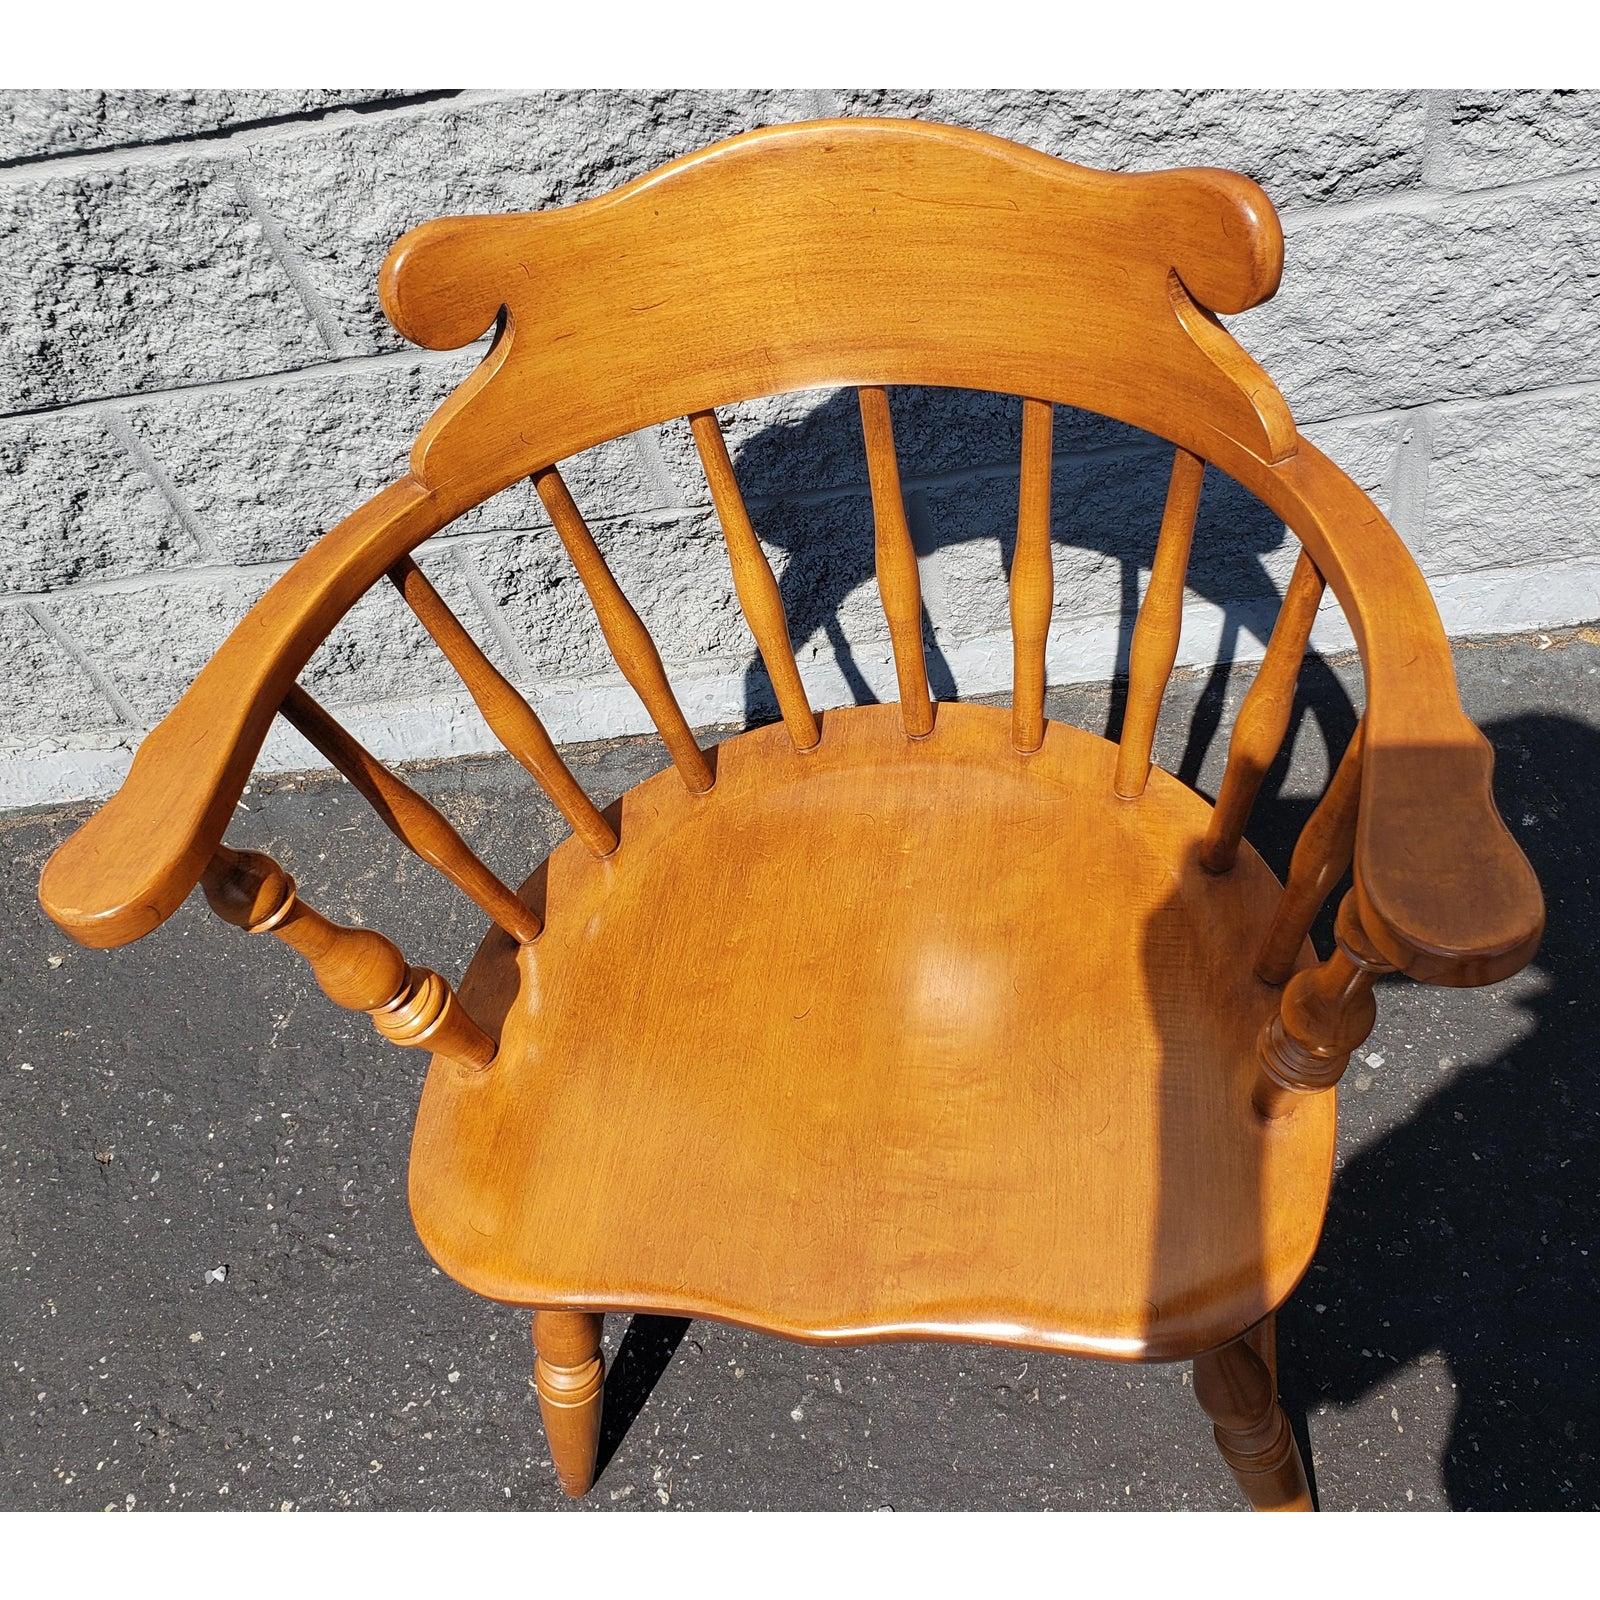 1970s Conant Ball low back windsor chairs. Solid maple wood construction. Excellent condition.
Low back and bow back with spindles.
Measurements are 25.25